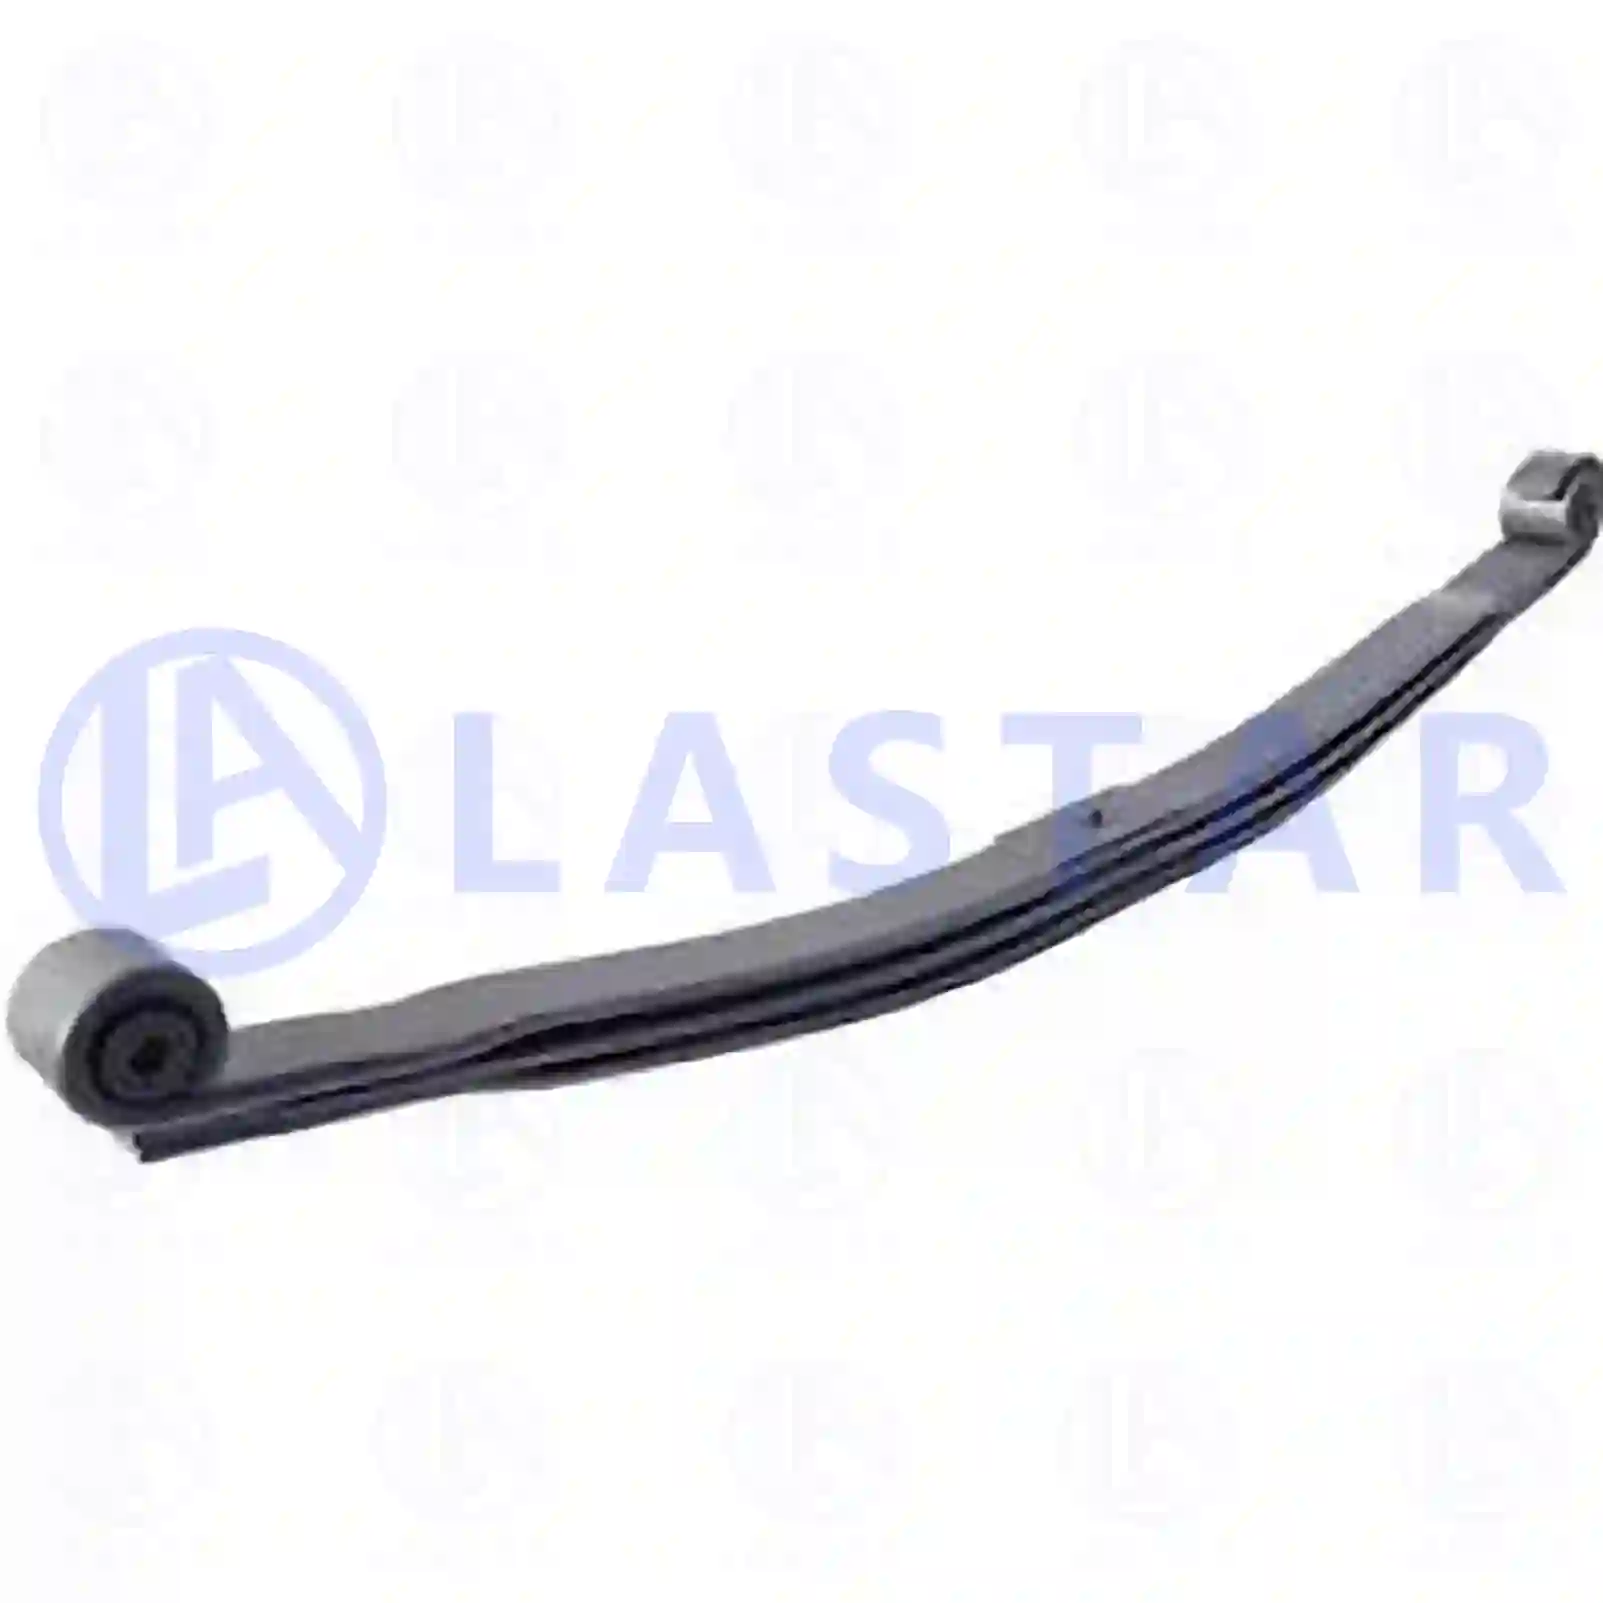 Leaf spring, front, 77728093, 9443200202 ||  77728093 Lastar Spare Part | Truck Spare Parts, Auotomotive Spare Parts Leaf spring, front, 77728093, 9443200202 ||  77728093 Lastar Spare Part | Truck Spare Parts, Auotomotive Spare Parts